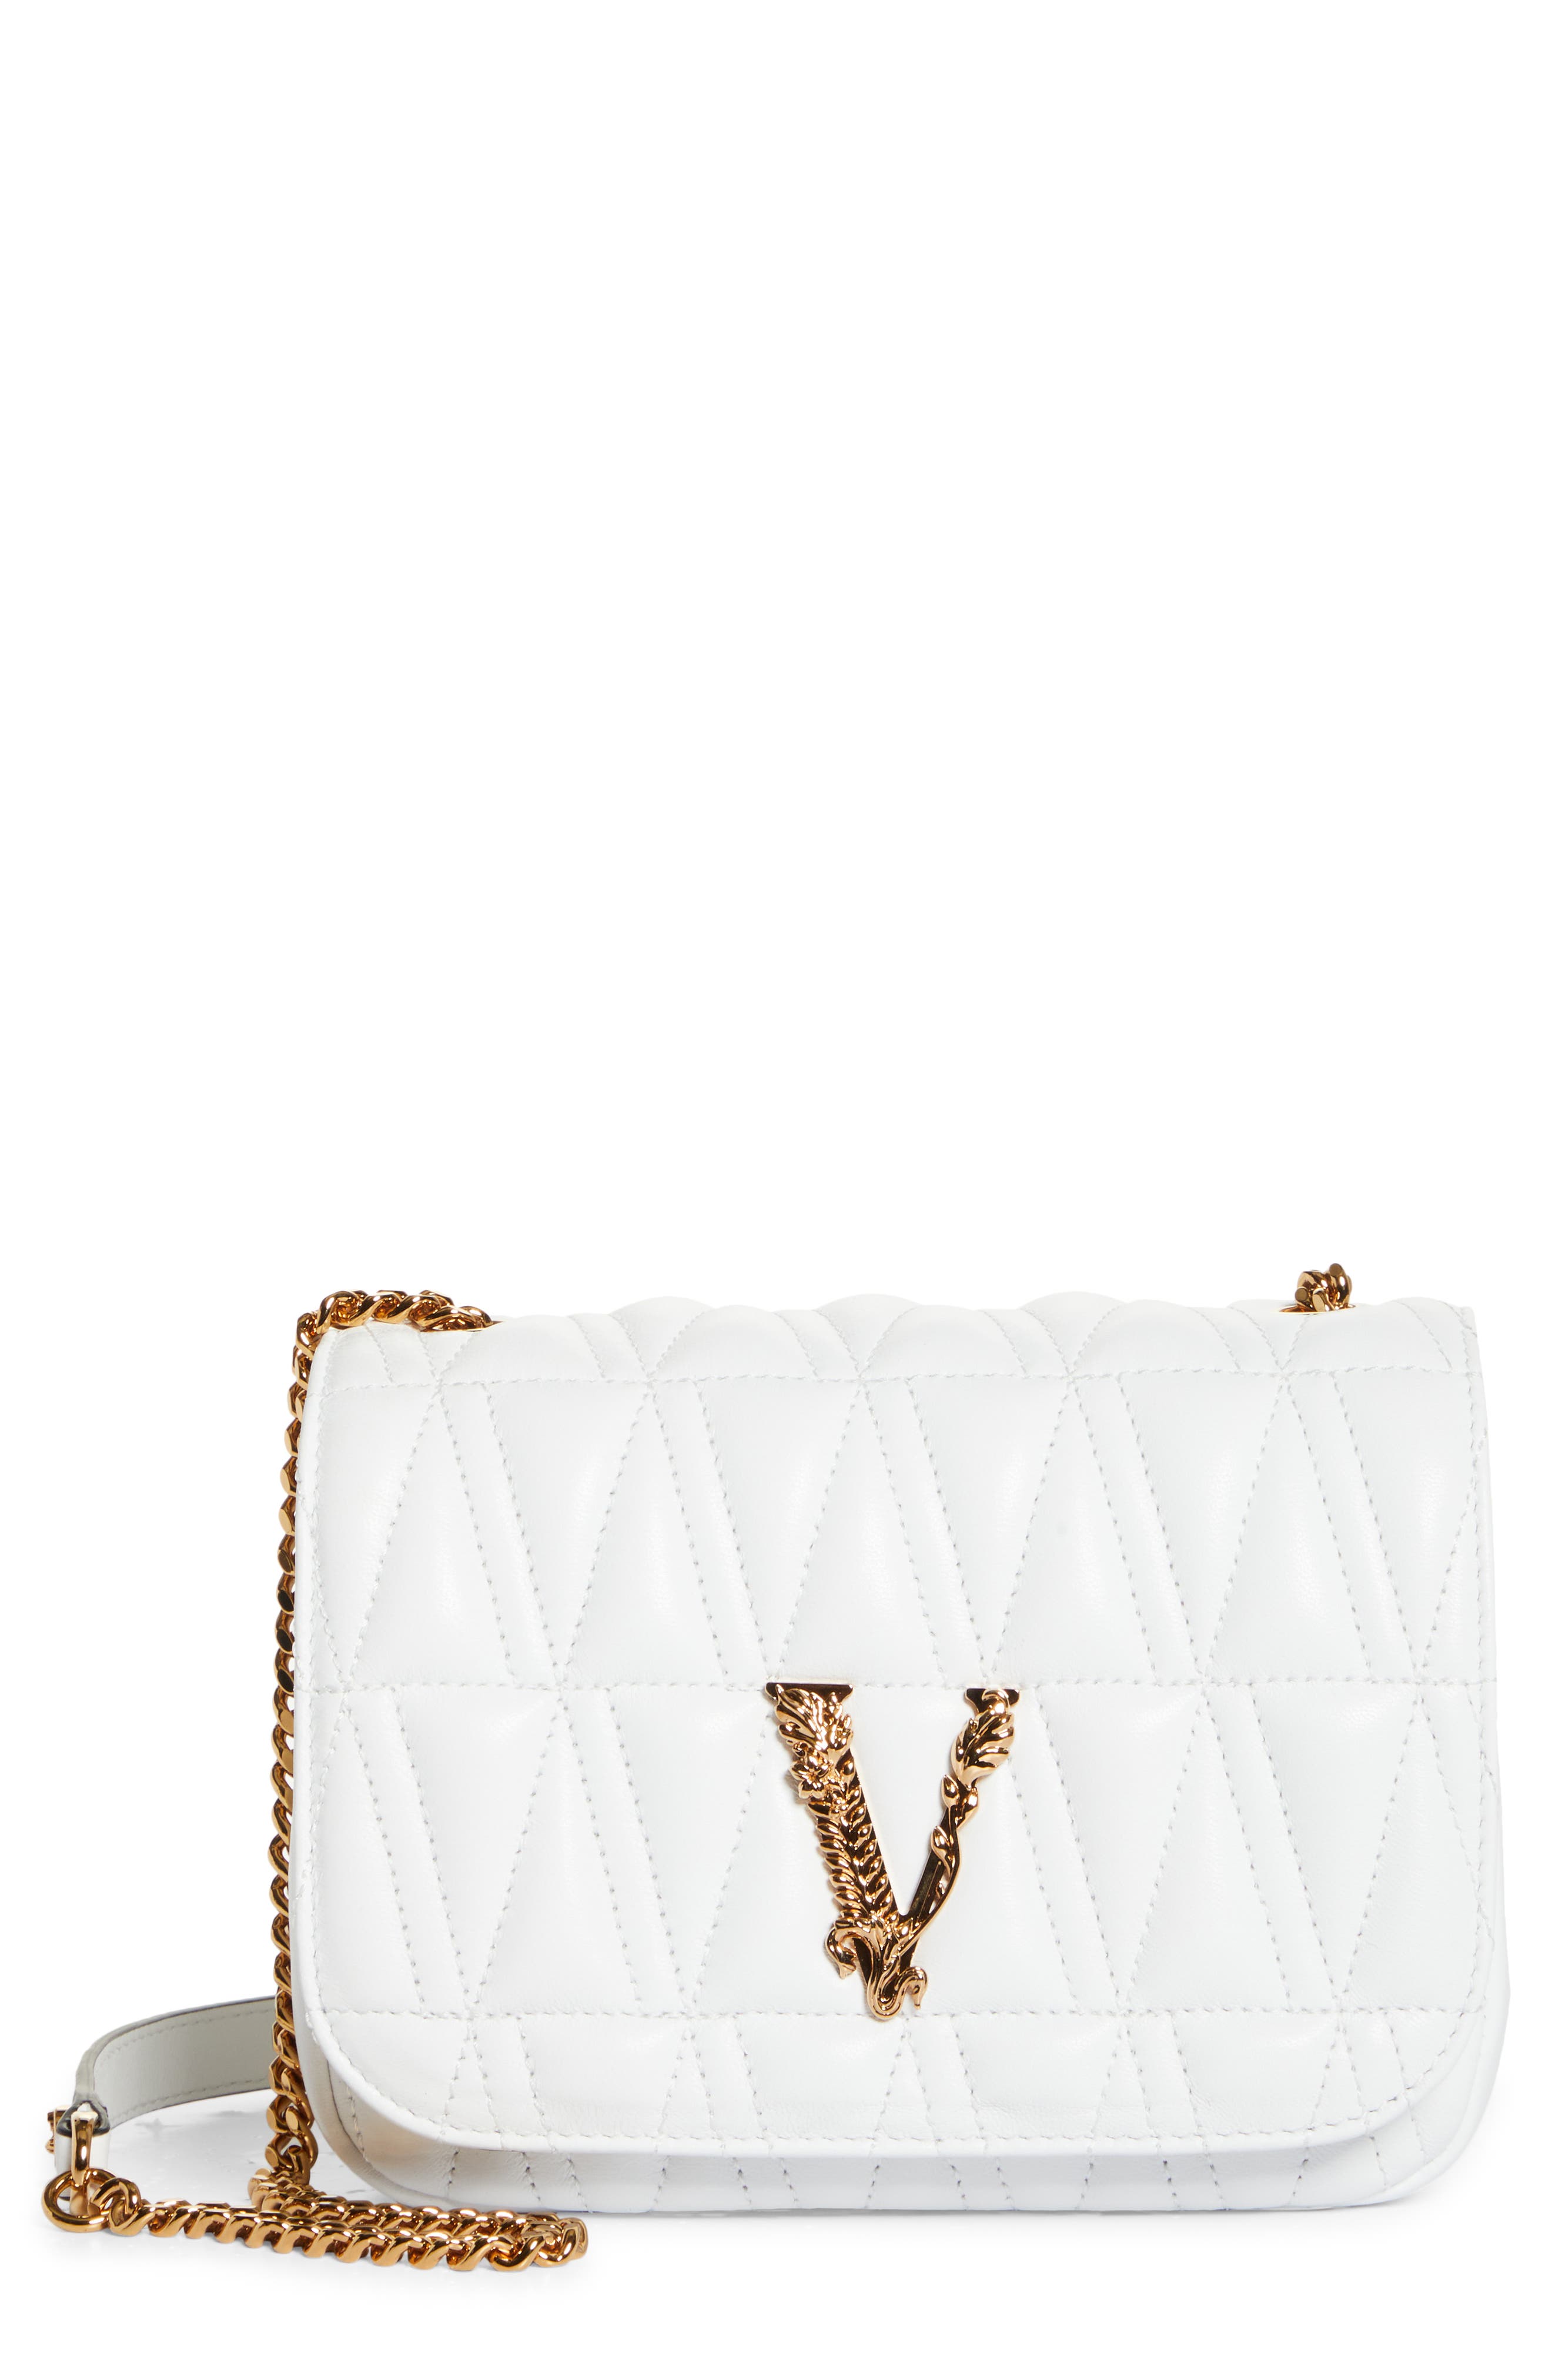 Versace Virtus Quilted Evening Bag in Optical White/Versace Gold